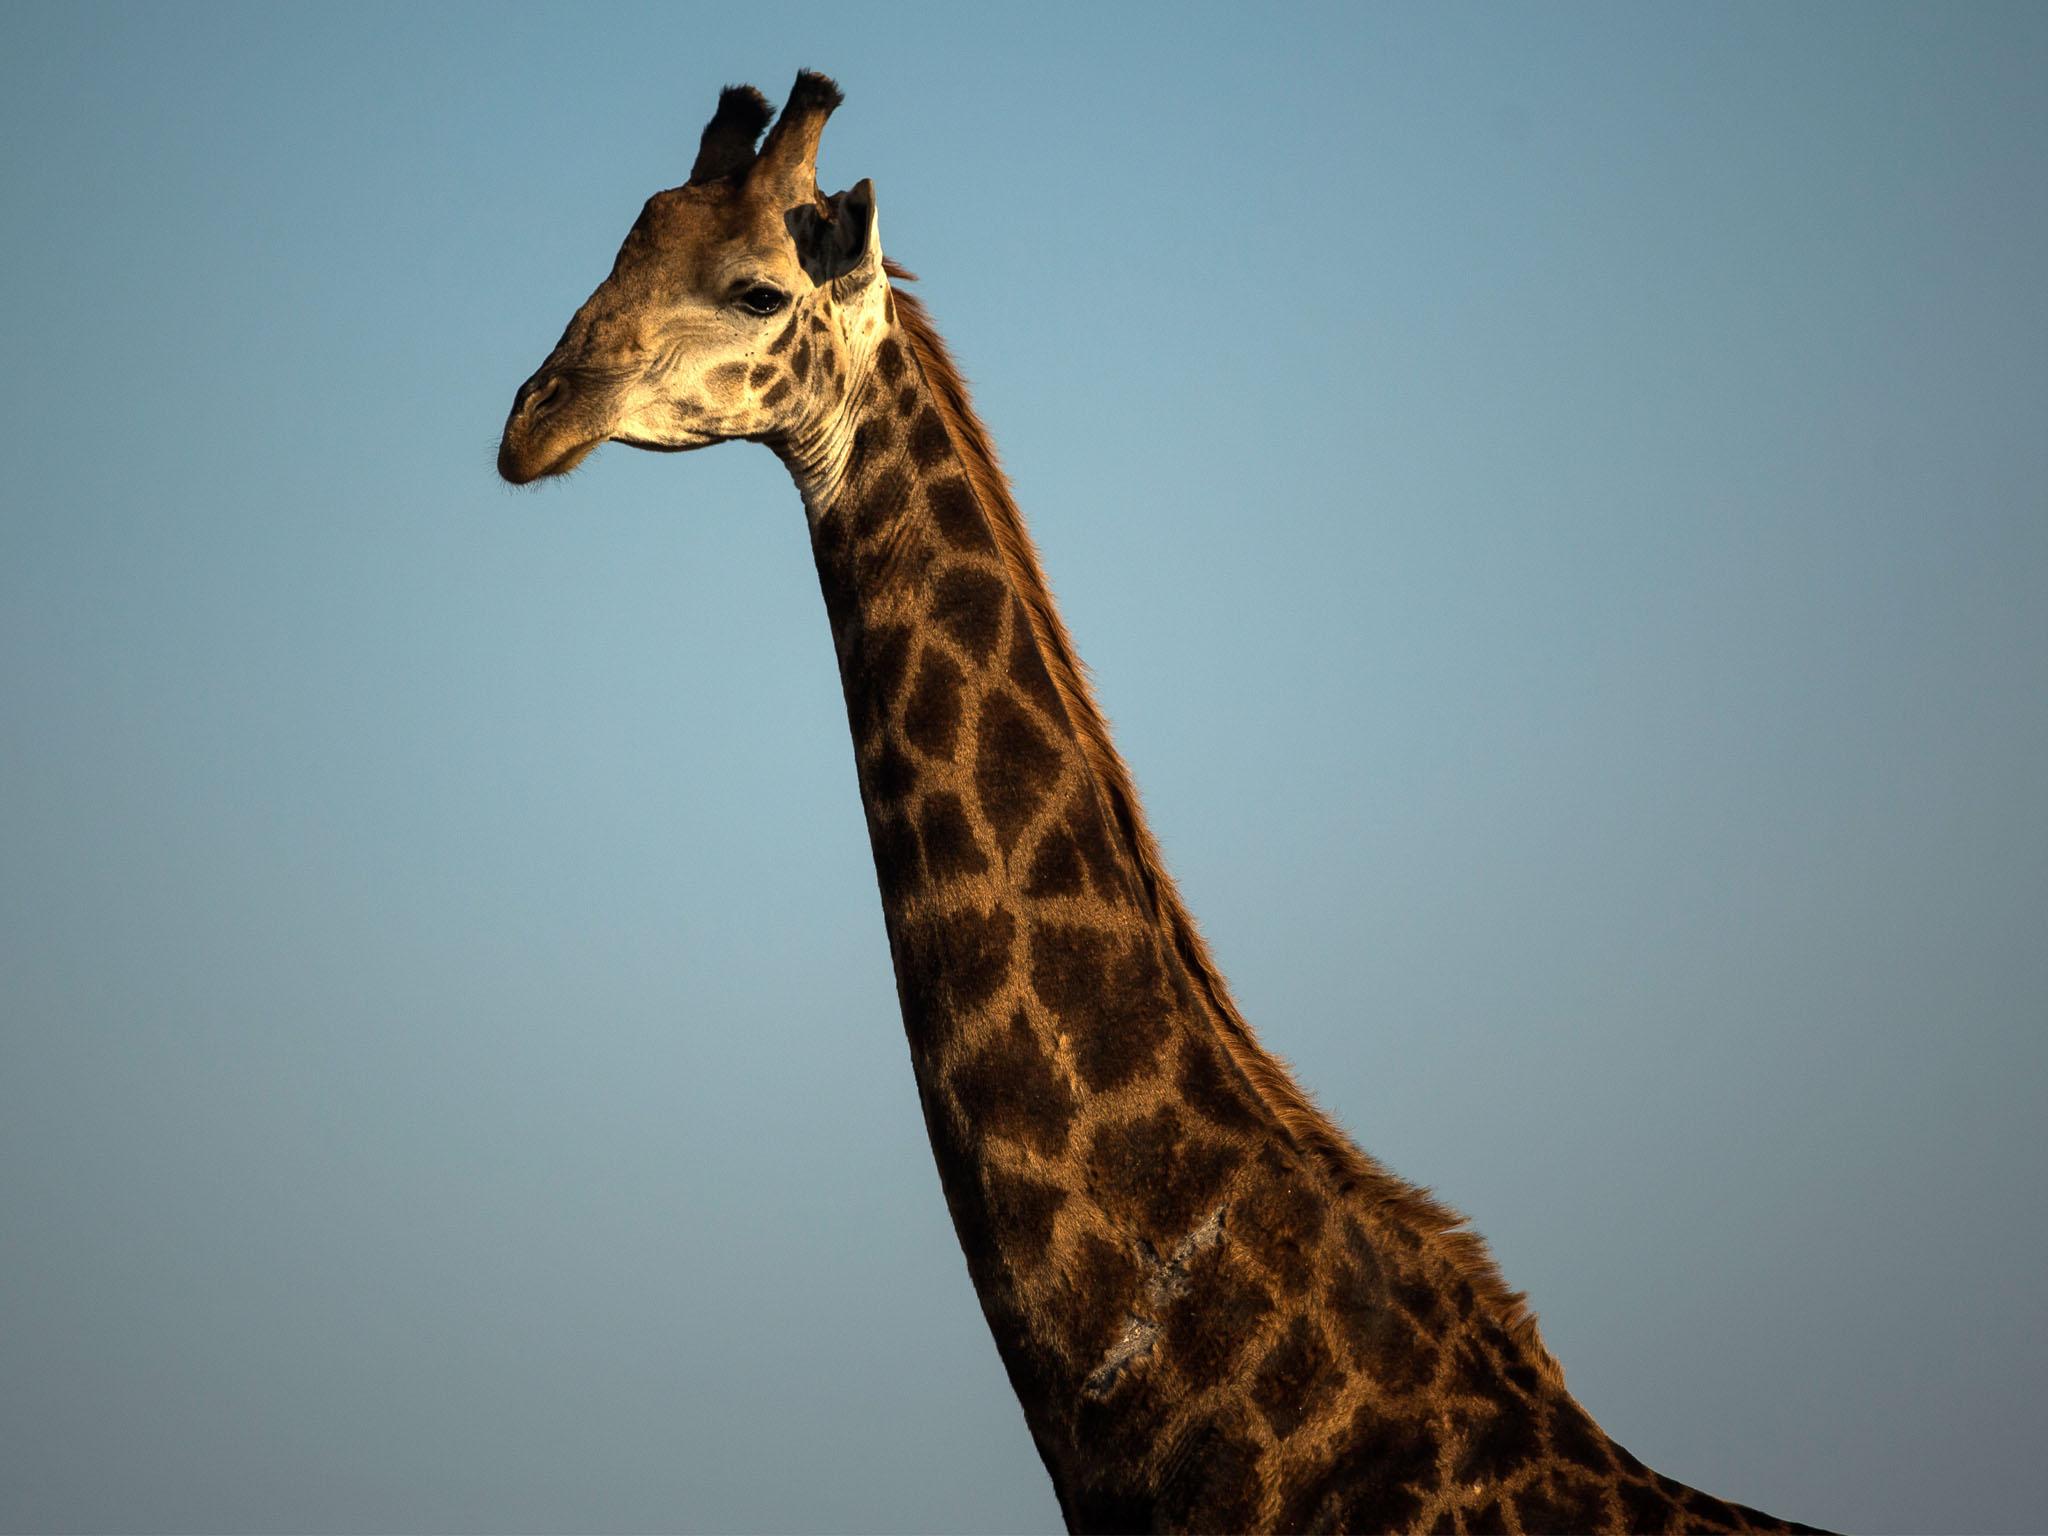 A giraffe at a wildlife park in South Africa. ‘We didn’t feel threatened because he just seemed to be inquisitive,’ said a member of the film crew